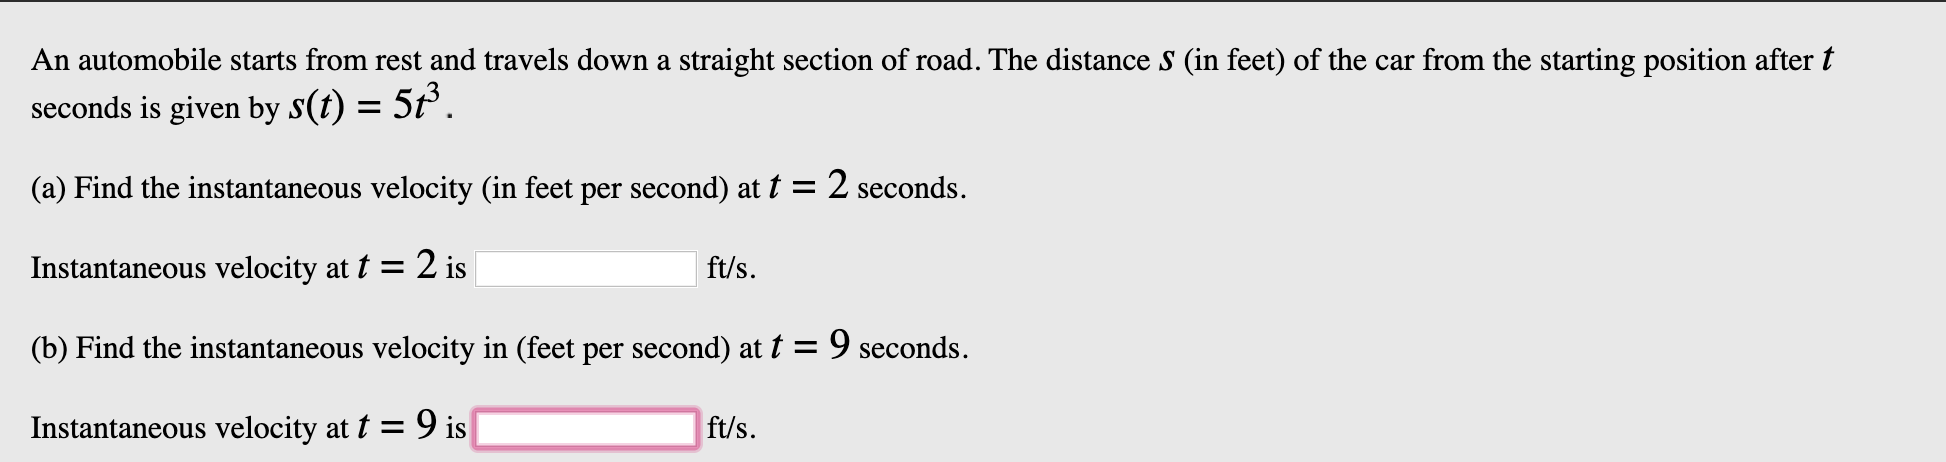 An automobile starts from rest and travels down a straight section of road. The distance s (in feet) of the car from the starting position after t
seconds is given by S(t) = 5t
(a) Find the instantaneous velocity (in feet per second) at t = 2 seconds
ft/s
Instantaneous velocity at t = 2 is
(b) Find the instantaneous velocity in (feet per second) at t = 9 seconds.
ft/s
Instantaneous velocity at t = 9 is
